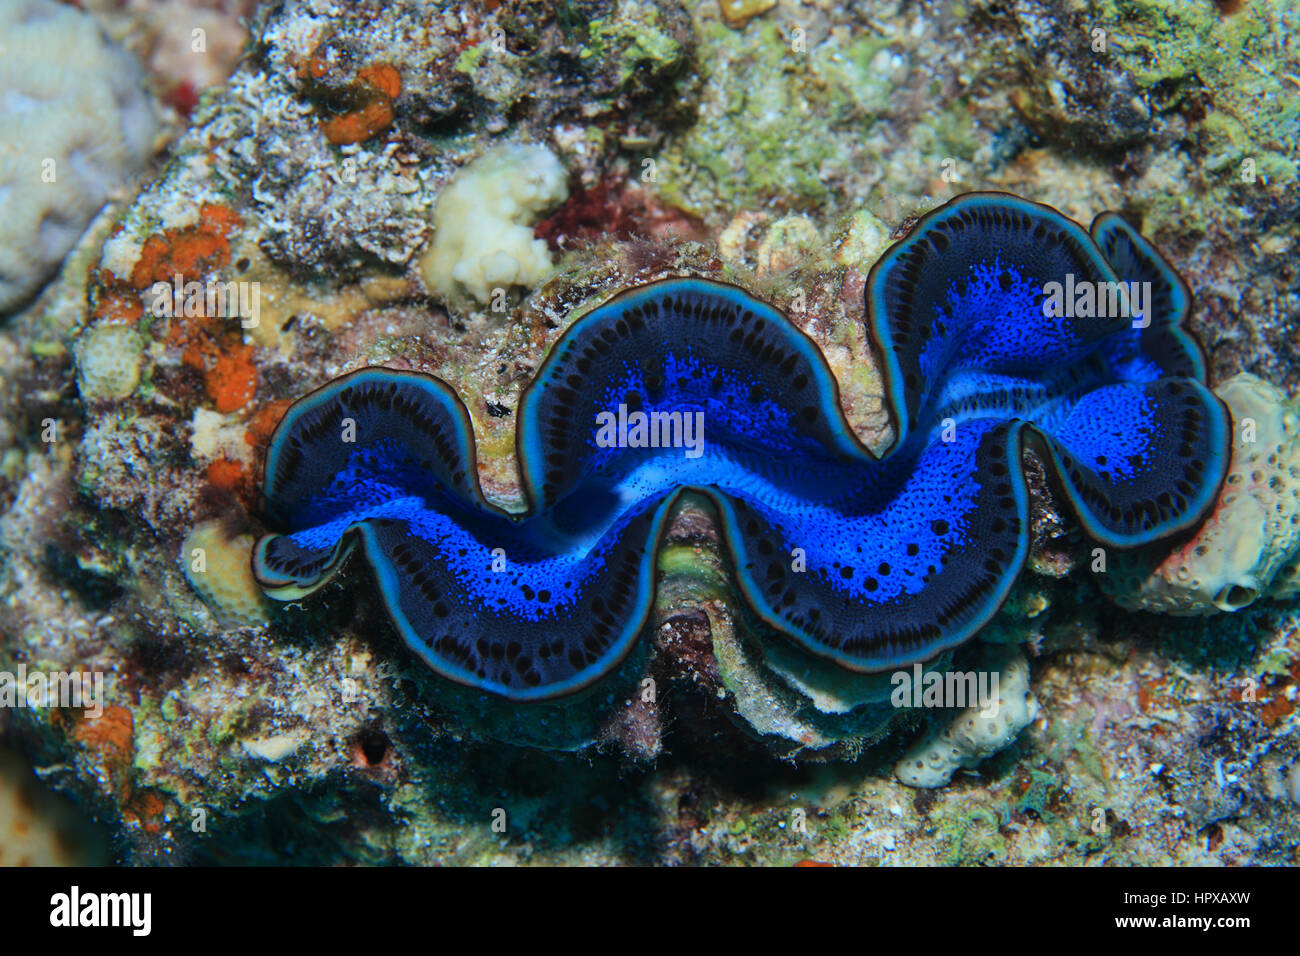 Fluted giant clam (Tridacna squamosa) underwater in the tropical coral reef of the Red Sea Stock Photo